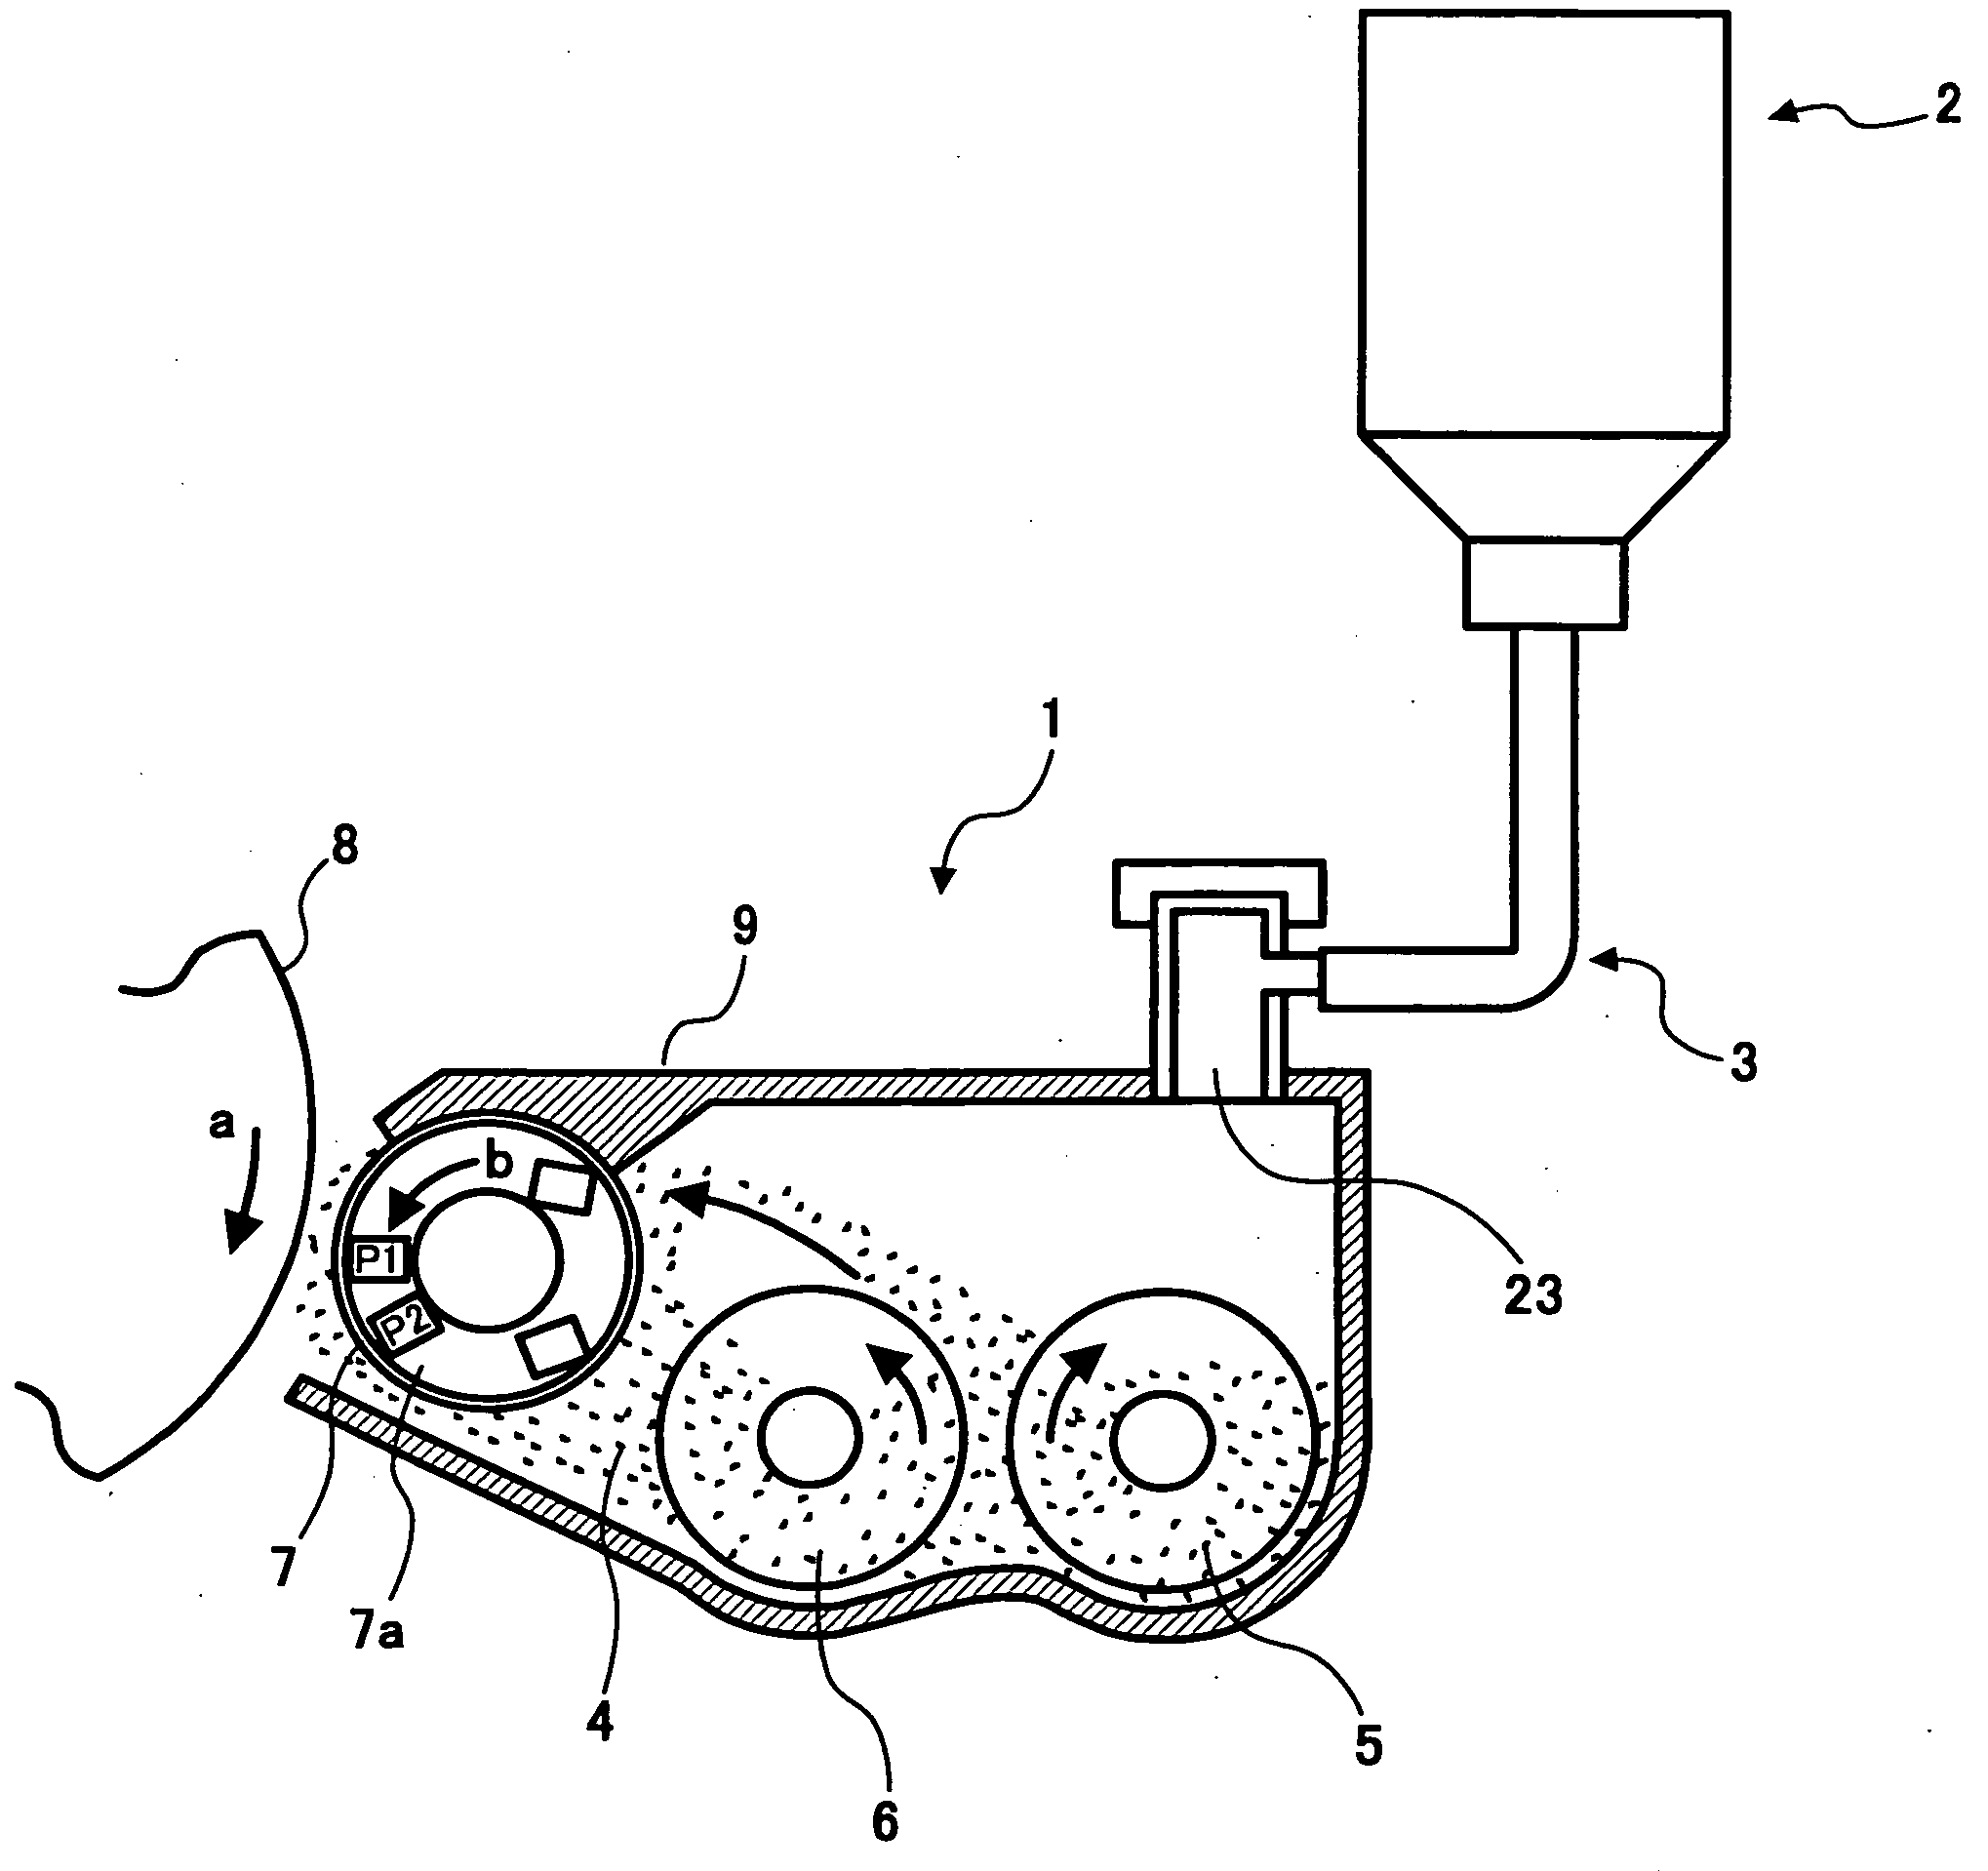 Developing method and apparatus using two-ingredient developer with prescribed coating of particles and resin